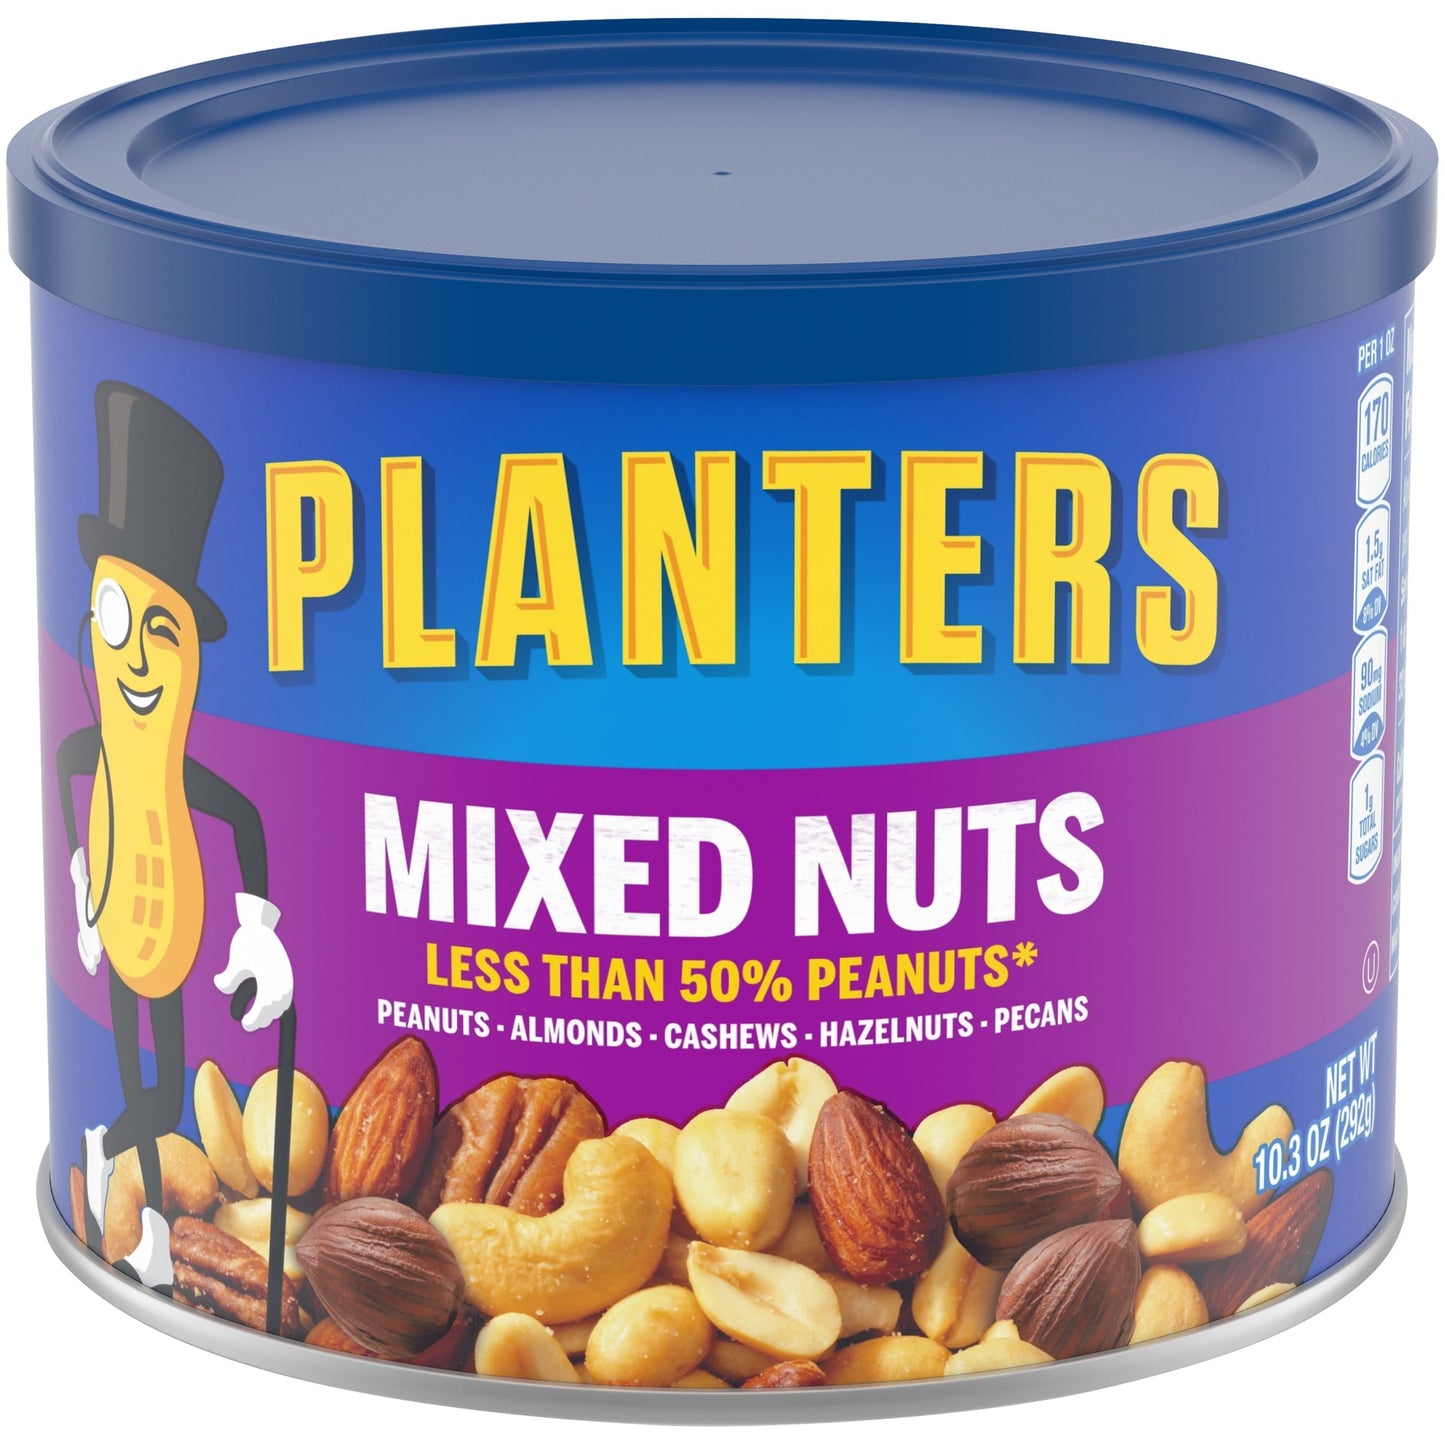 Planters Mixed Nuts Less Than 50% Peanuts with Peanuts, Almonds, Cashews, Hazelnuts & Pecans, 10.3 oz Canister